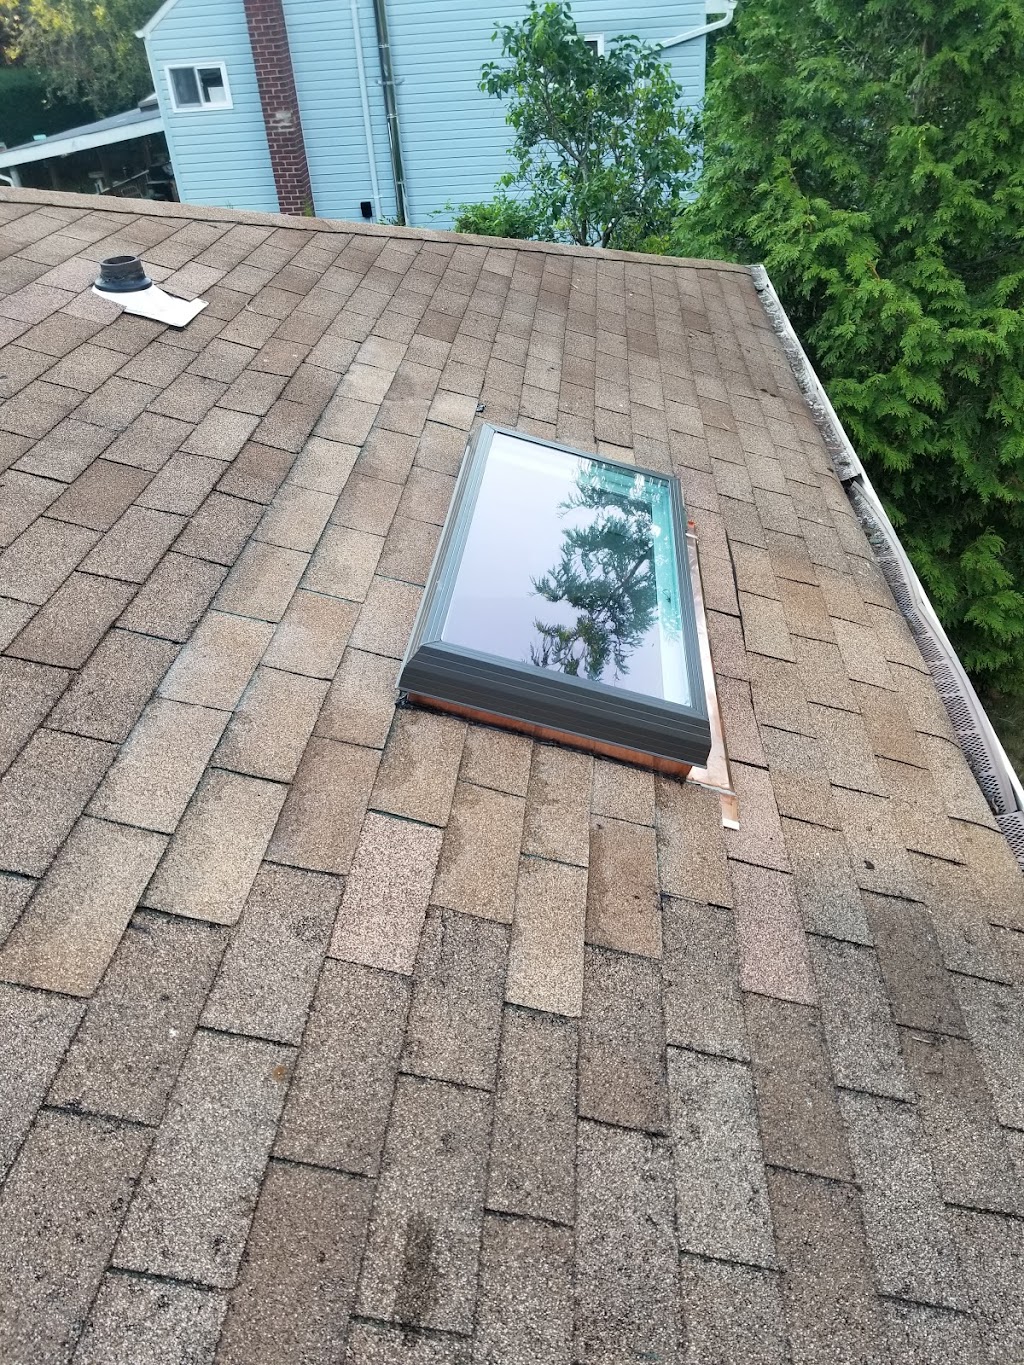 All Weather Roofing Inc | 756 S Country Rd, East Patchogue, NY 11772 | Phone: (631) 498-8557